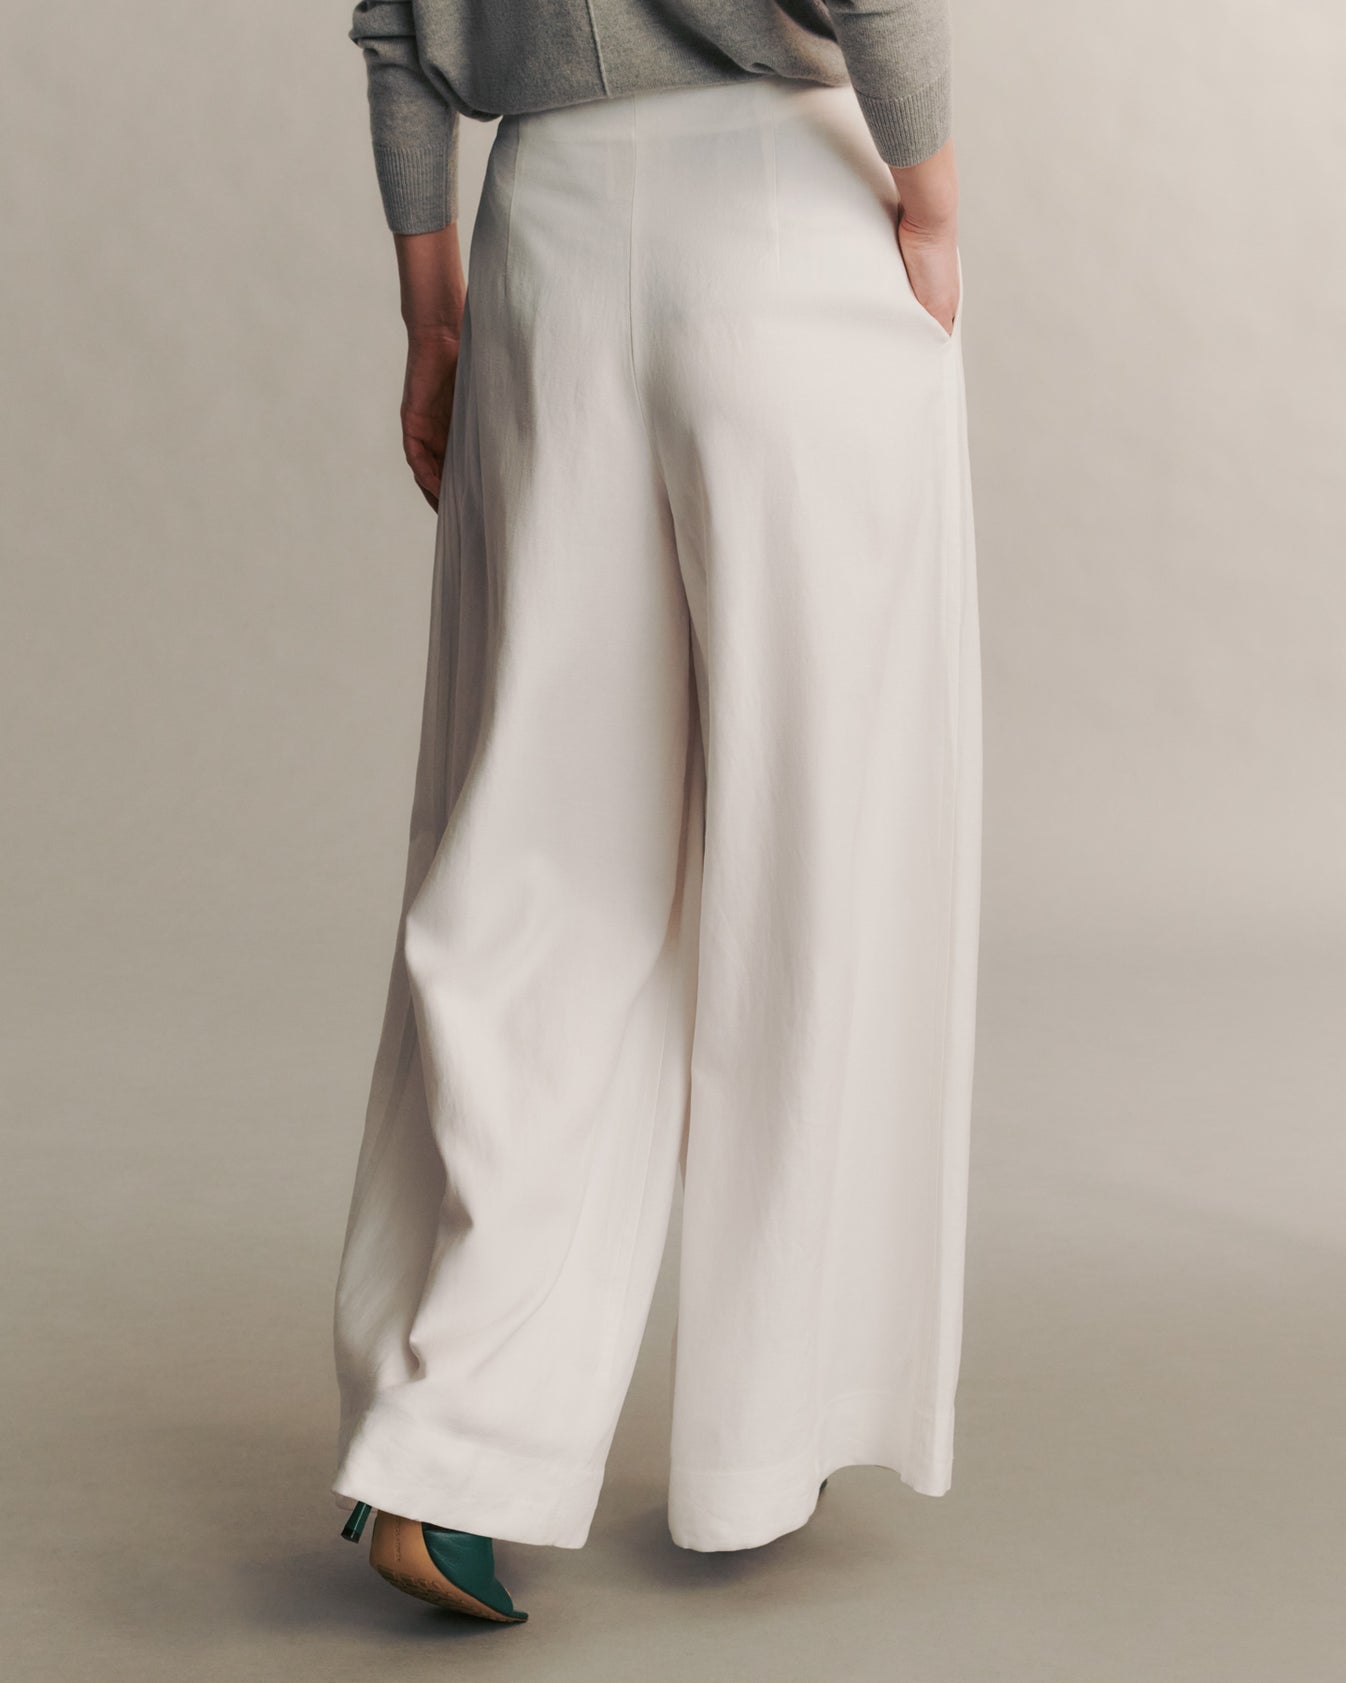 TWP White Drew Pant in Cotton Linen view 5